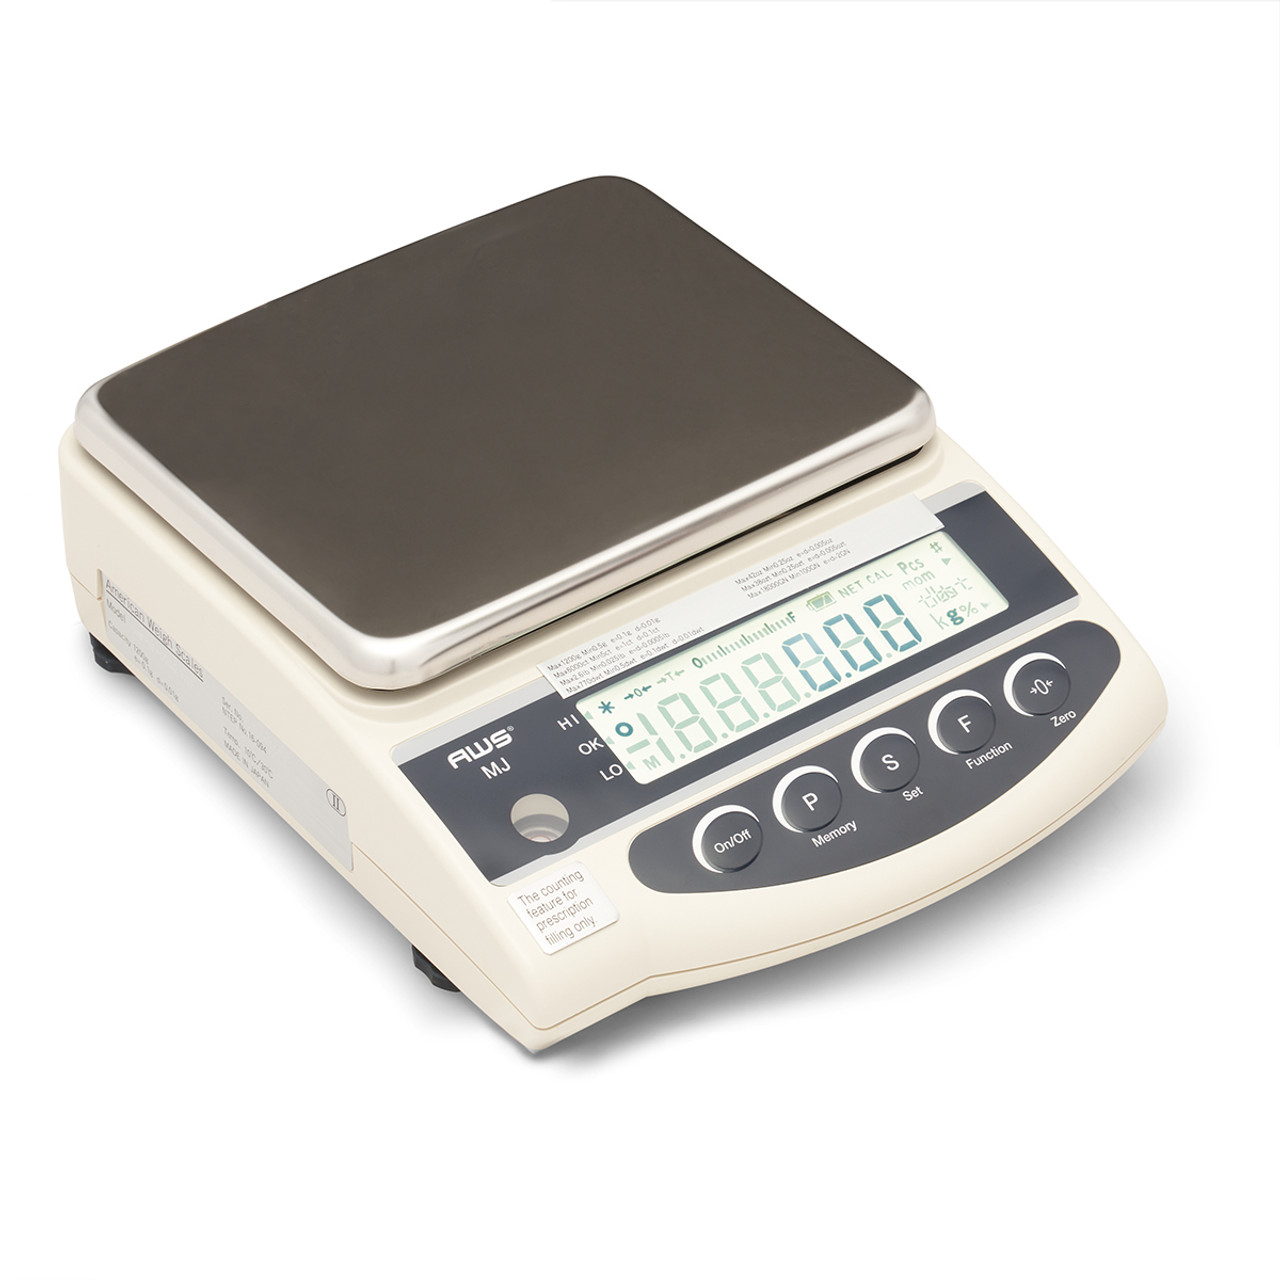 Buy Weed scales online - Weighing Scale